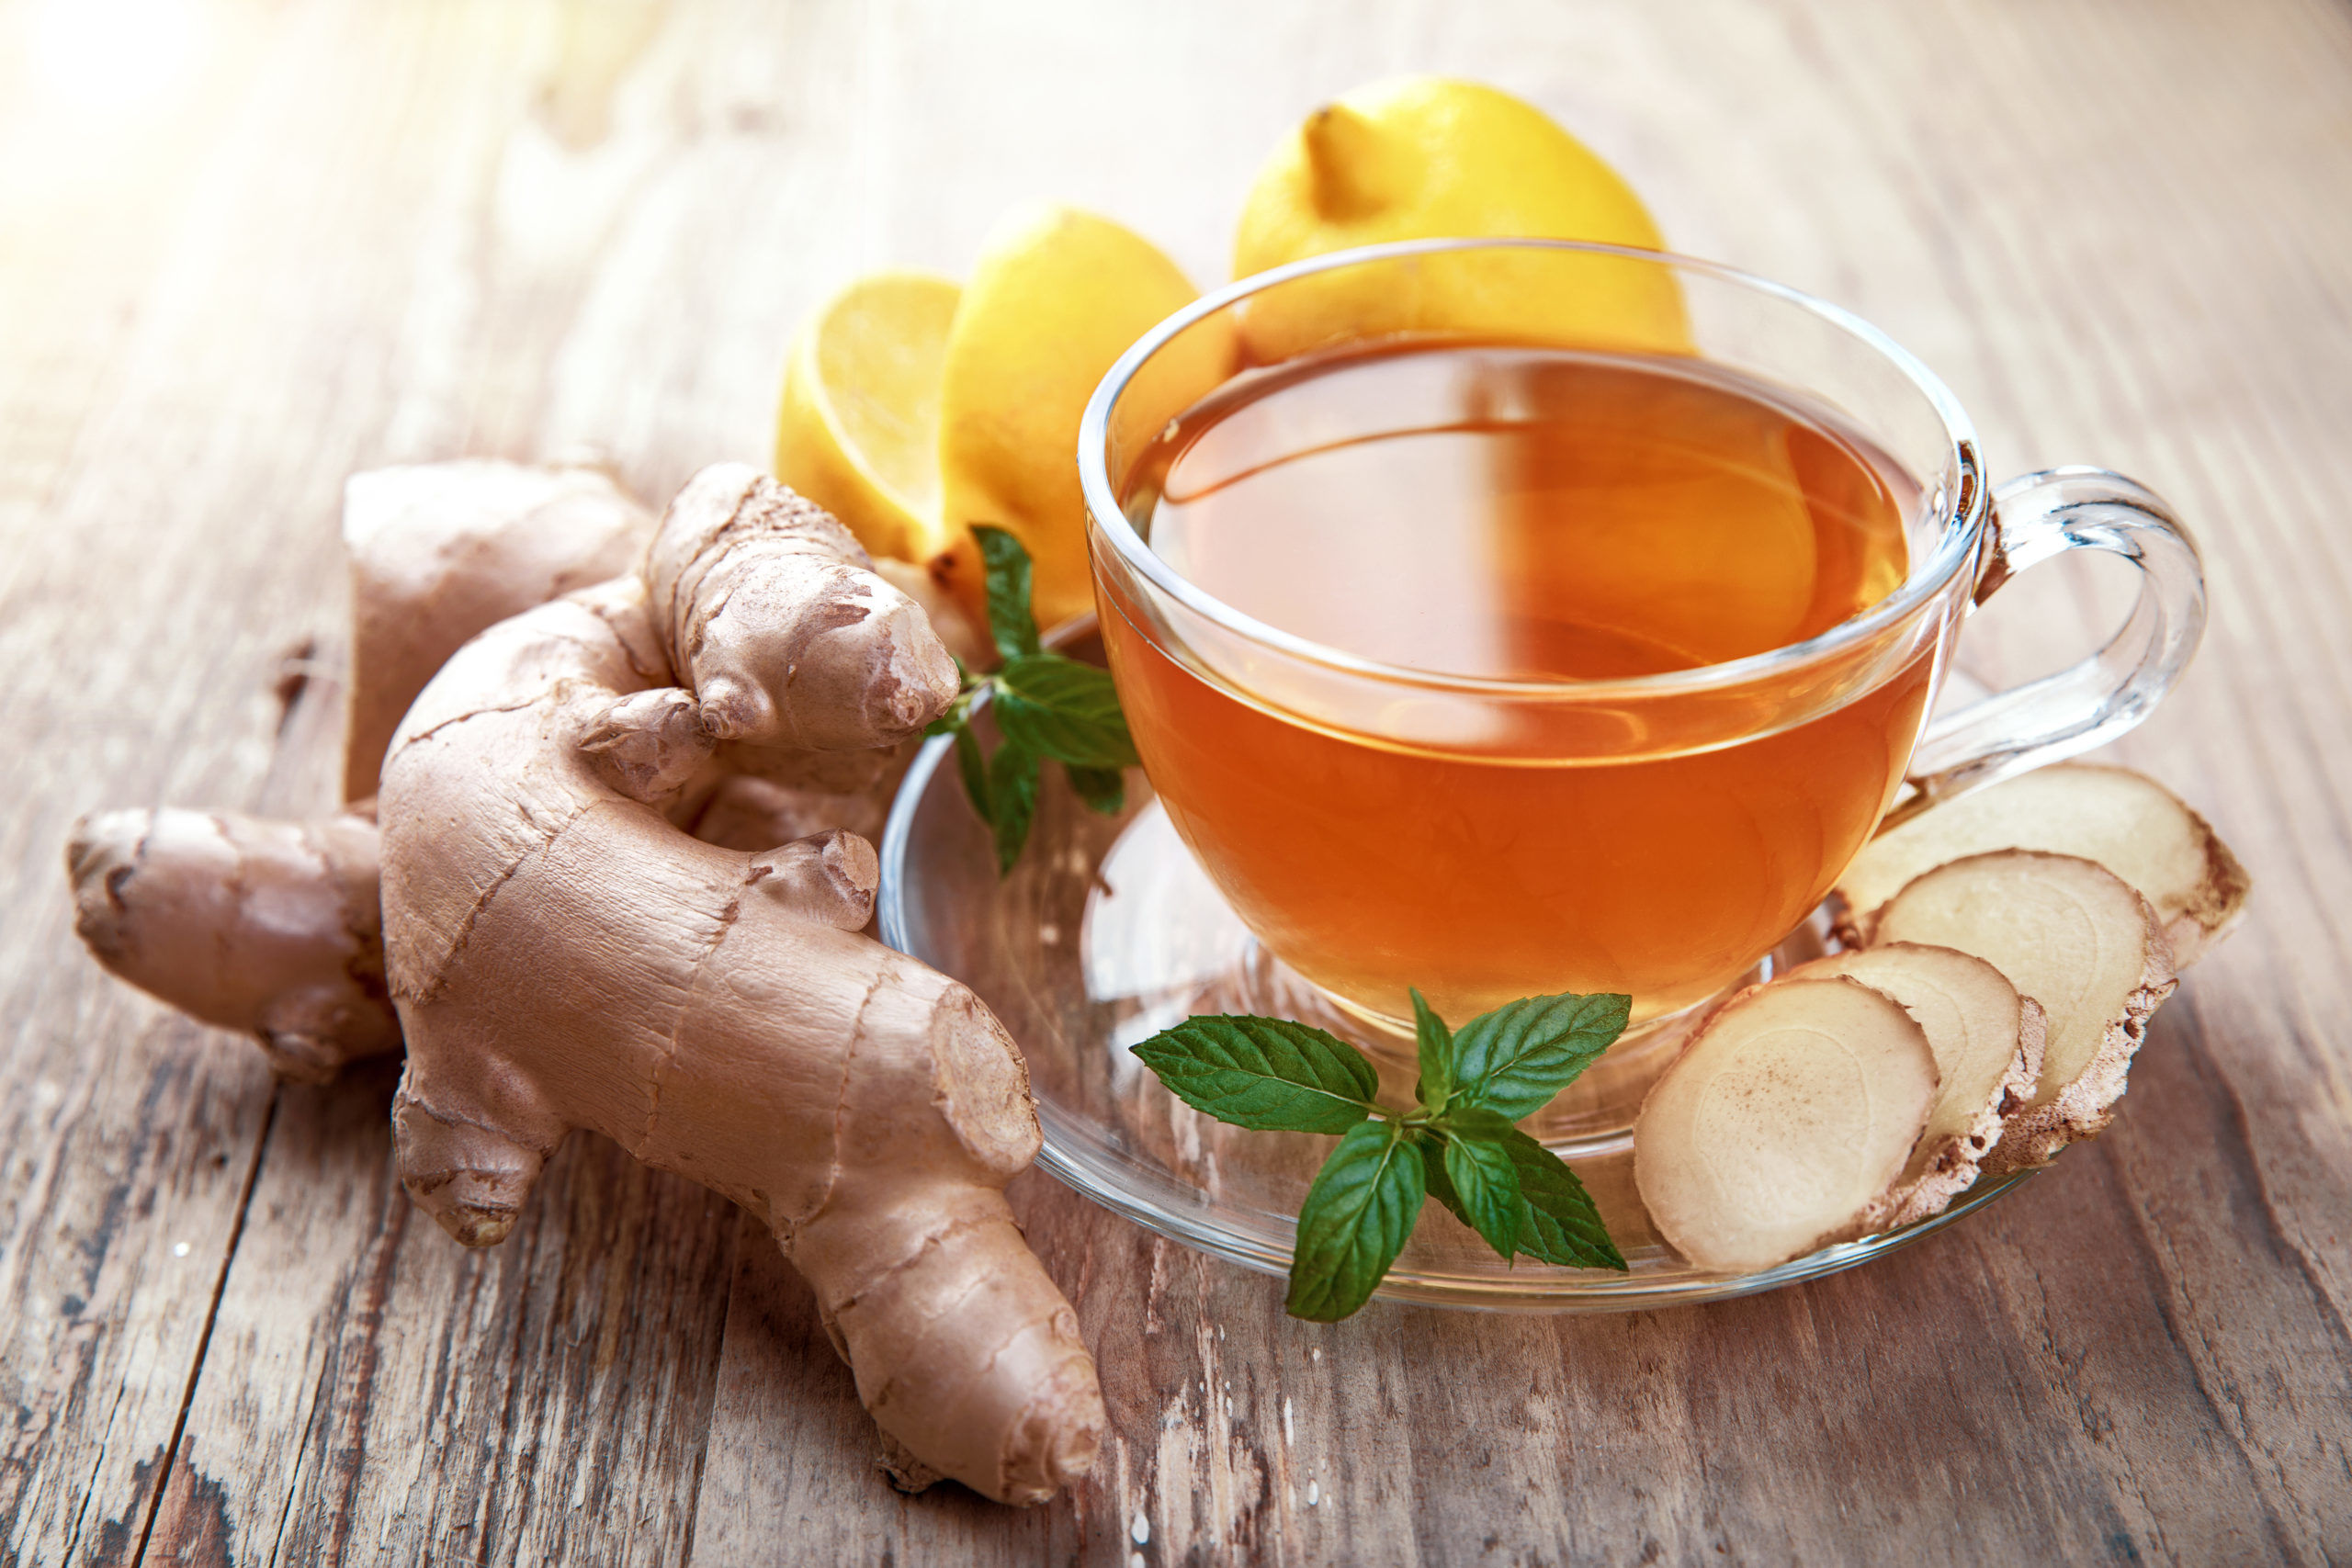 Ginger Tea Recipes Tasty Beverage With Many Health Benefits Migrelief,Crocheting For Beginners